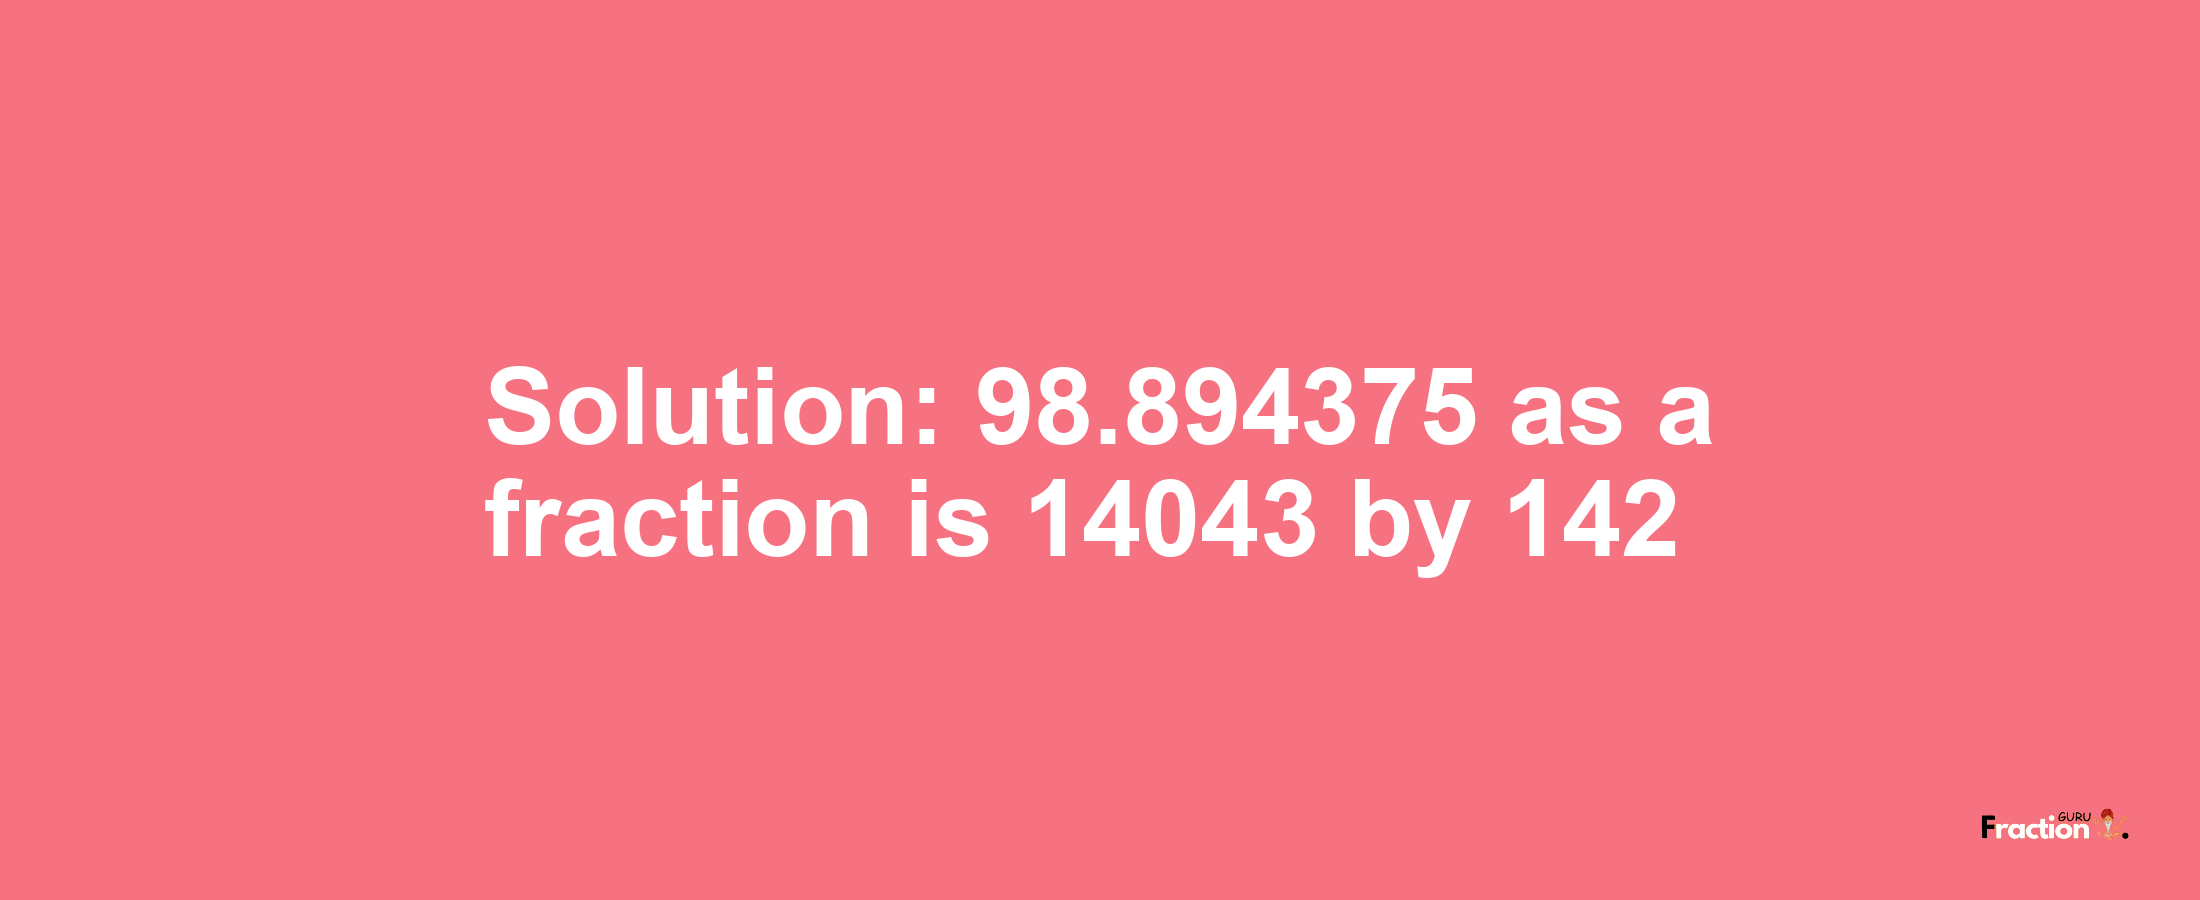 Solution:98.894375 as a fraction is 14043/142